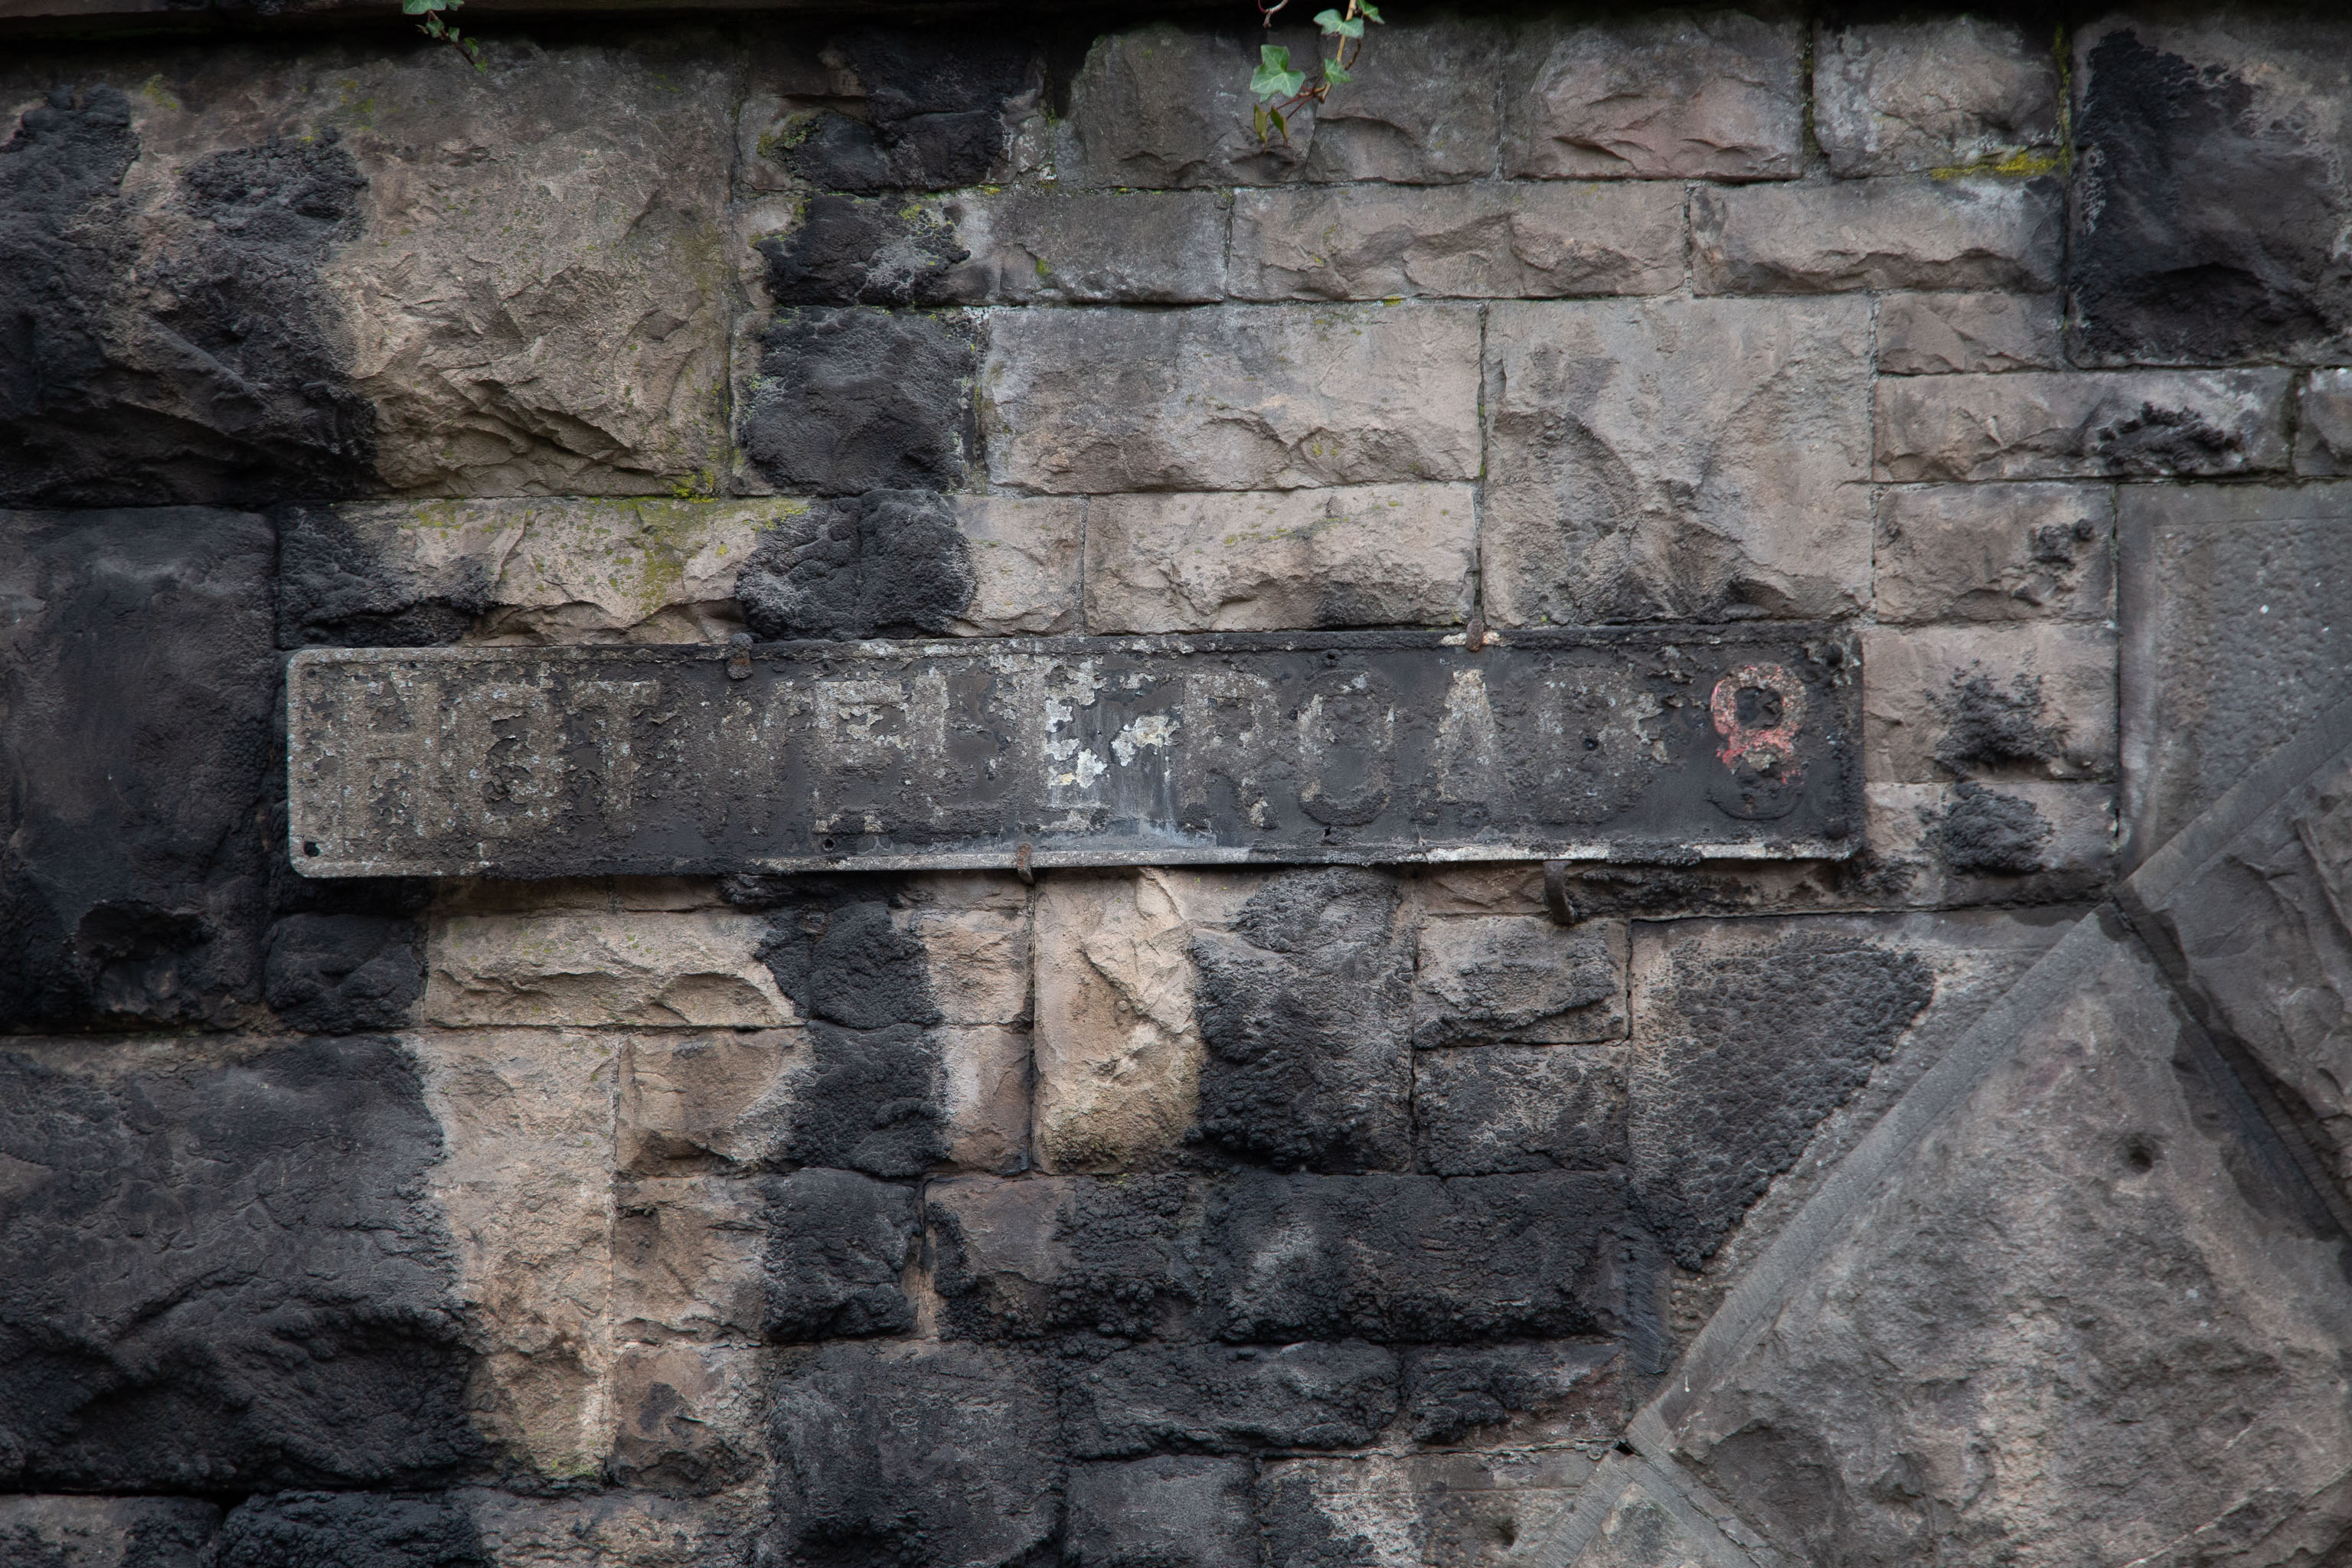 HOTWELL ROAD 8
The older signs in Bristol just say e.g. 8 instead of the full postcode district of BS8.

This sign, on the grotto that used to house the last rema...